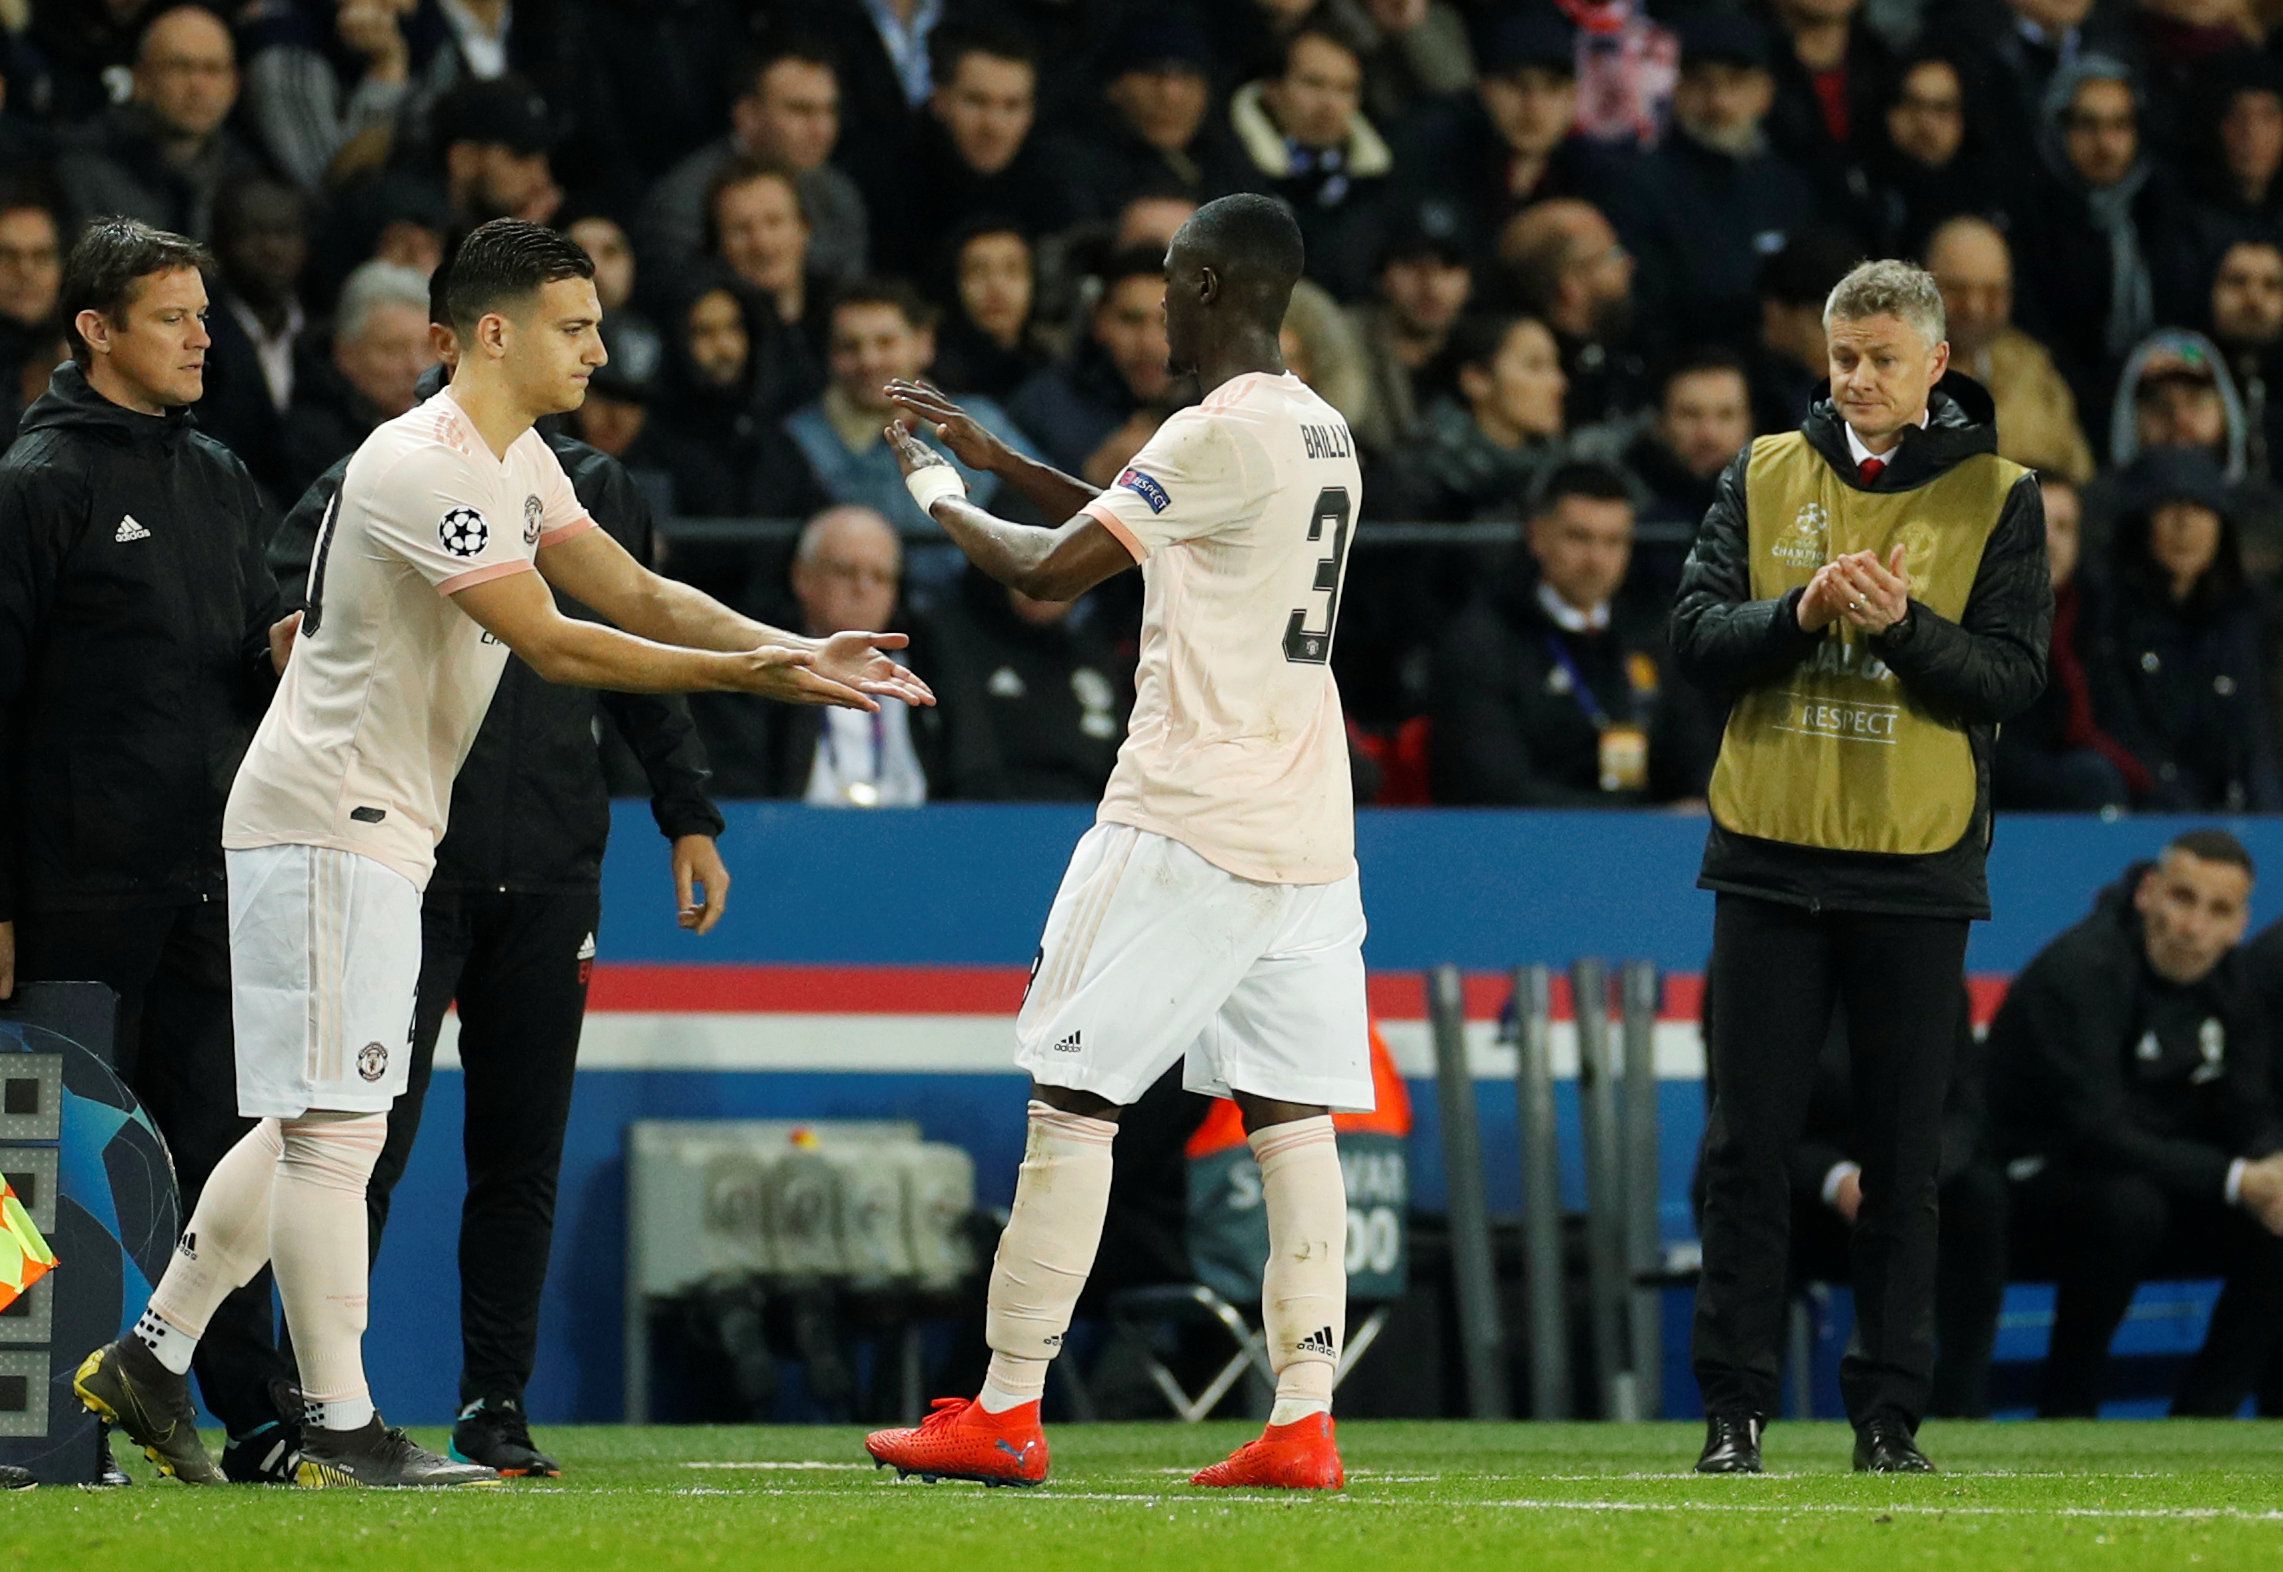 Soccer Football - Champions League - Round of 16 Second Leg - Paris St Germain v Manchester United - Parc des Princes, Paris, France - March 6, 2019  Manchester United's Diogo Dalot comes on as a substitute to replace Eric Bailly as interim manager Ole Gunnar Solskjaer applauds  Action Images via Reuters/John Sibley